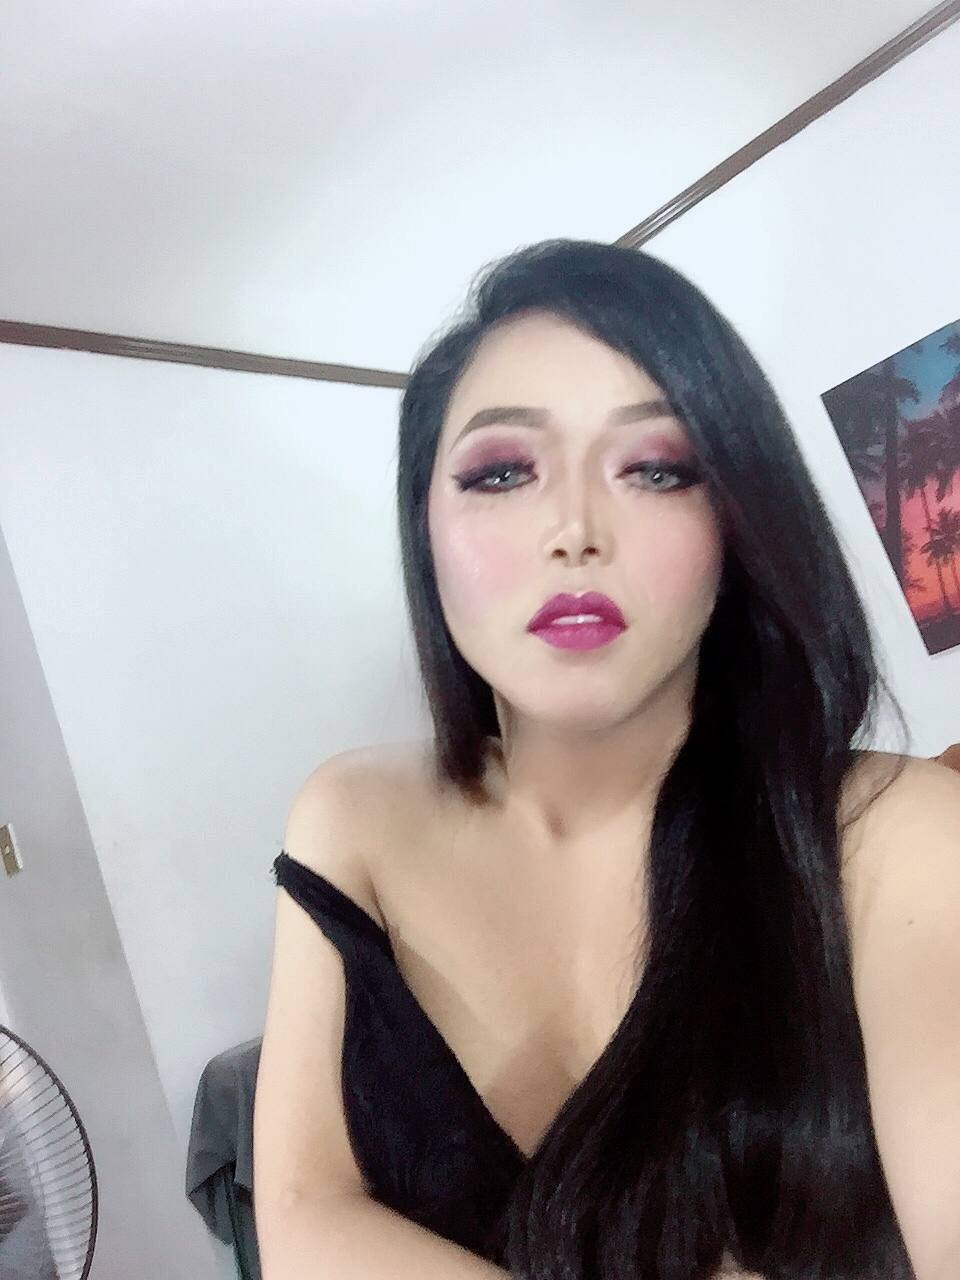 Newest temptation Cam show TS Angelica, Filipino Transsexual. 